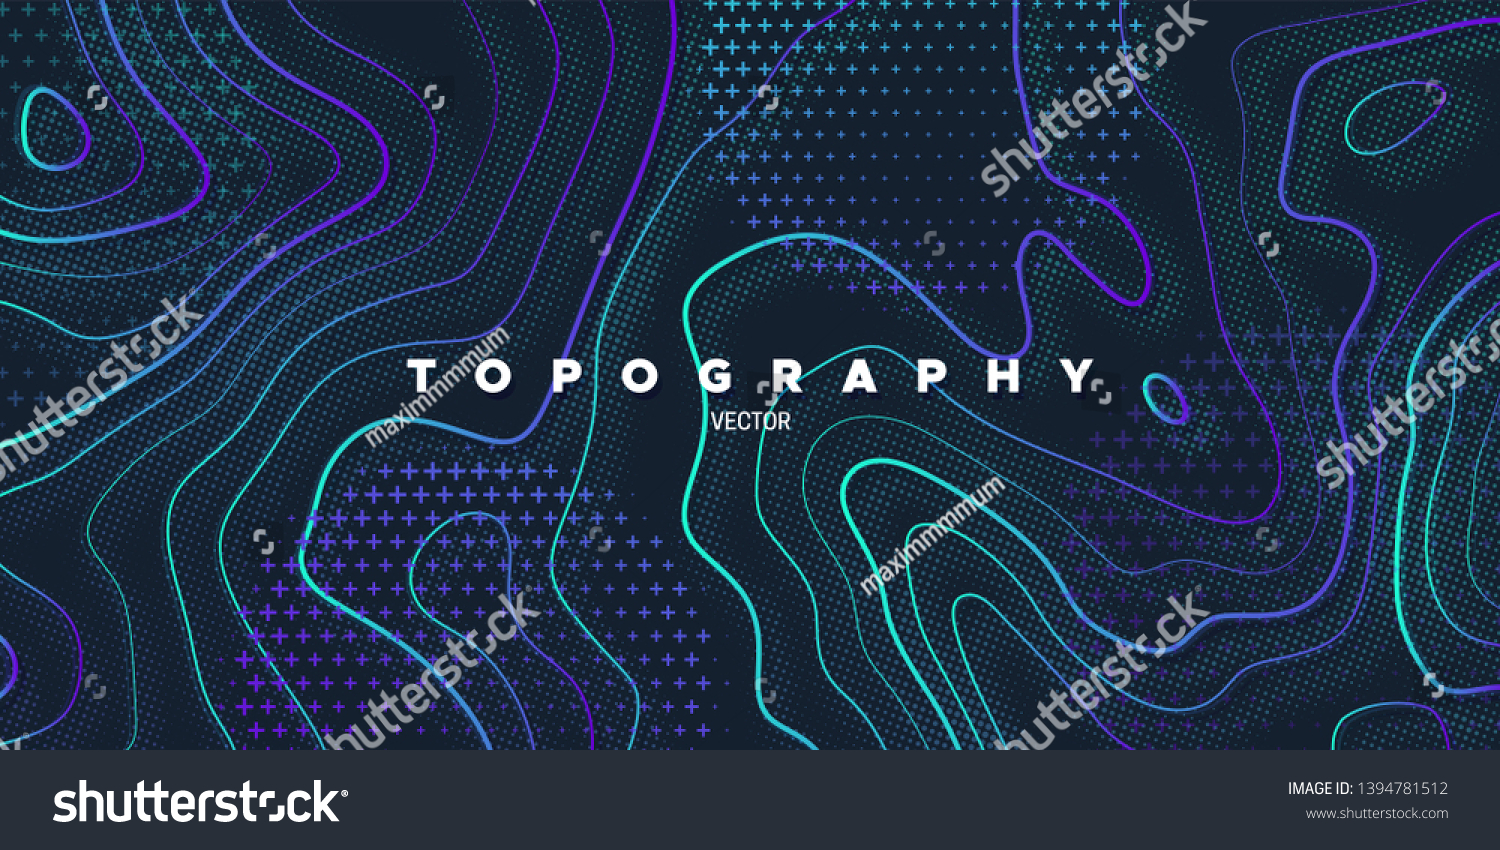 Topography relief. Abstract memphis background. Vector minimal illustration. Liquid gardients. Outline cartography landscape. Modern poster design. Trendy cover with wavy colorful lines #1394781512